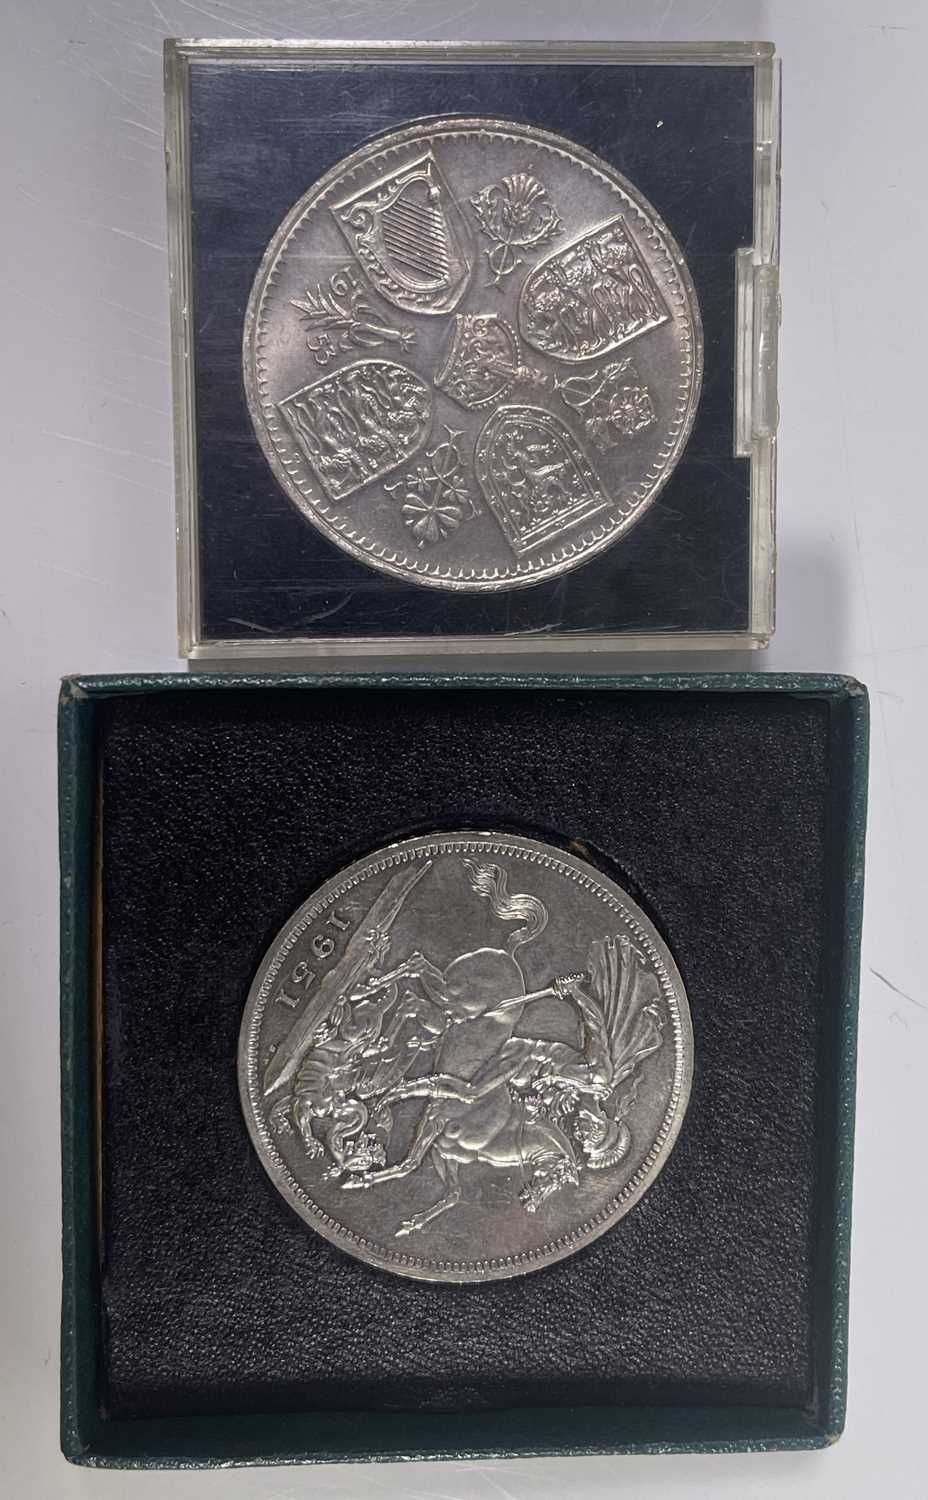 COLLECTABLES INC SILVER SOVEREIGN CASE 1907. - Image 4 of 5